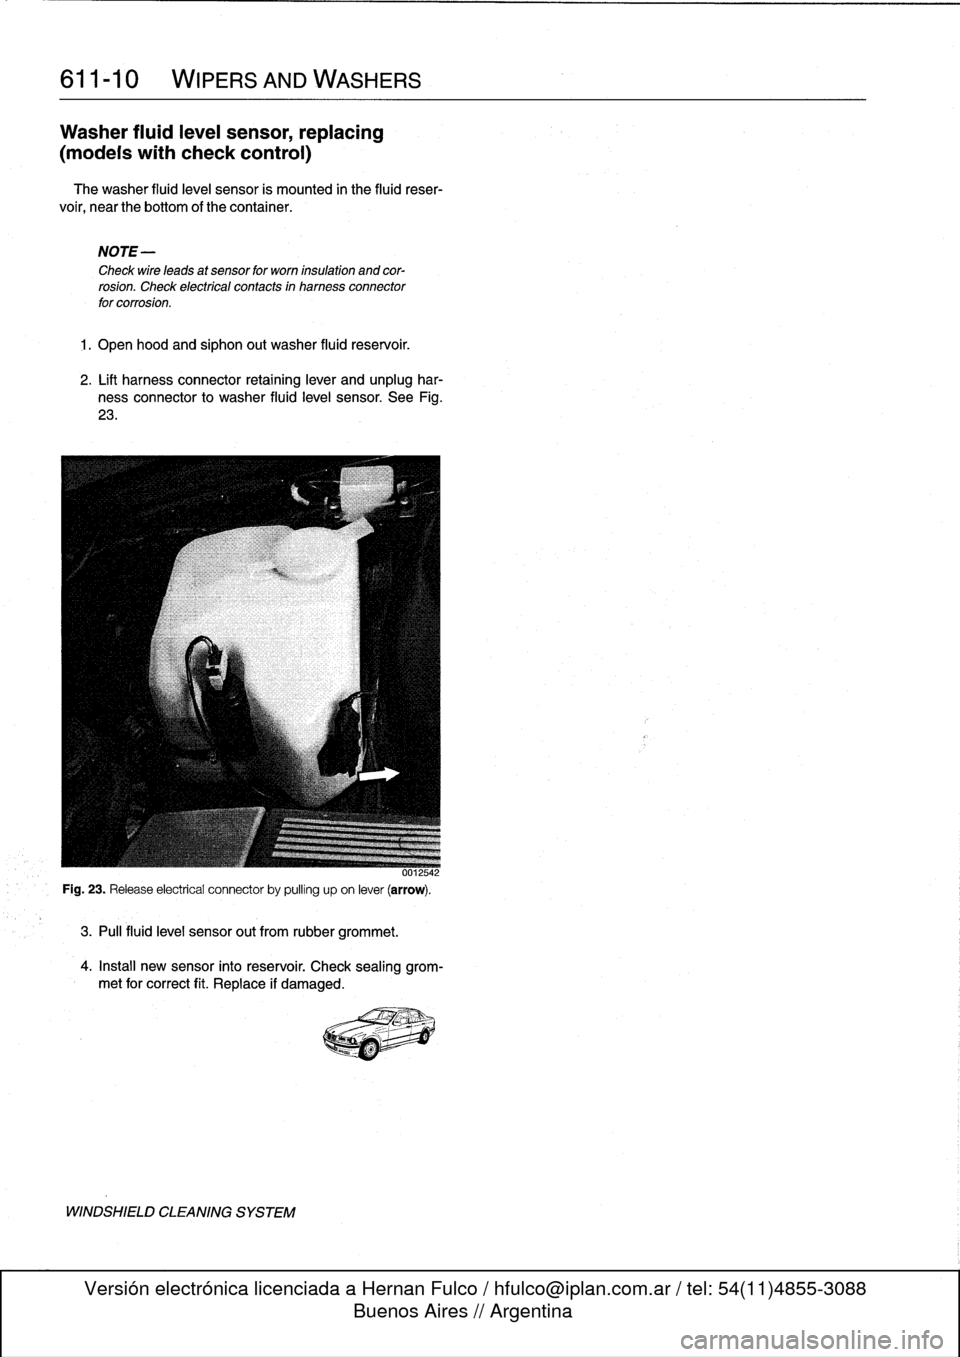 BMW 323i 1995 E36 Workshop Manual 
611-
1
0

	

WIPERS
AND
WASHERS

Washer
fluidleve¡
sensor,
replacing

(modeis
with
check
control)

The
washer
fluid
level
sensor
is
mounted
in
the
fluid
reser-

voir,
near
the
bottom
of
thecontainer